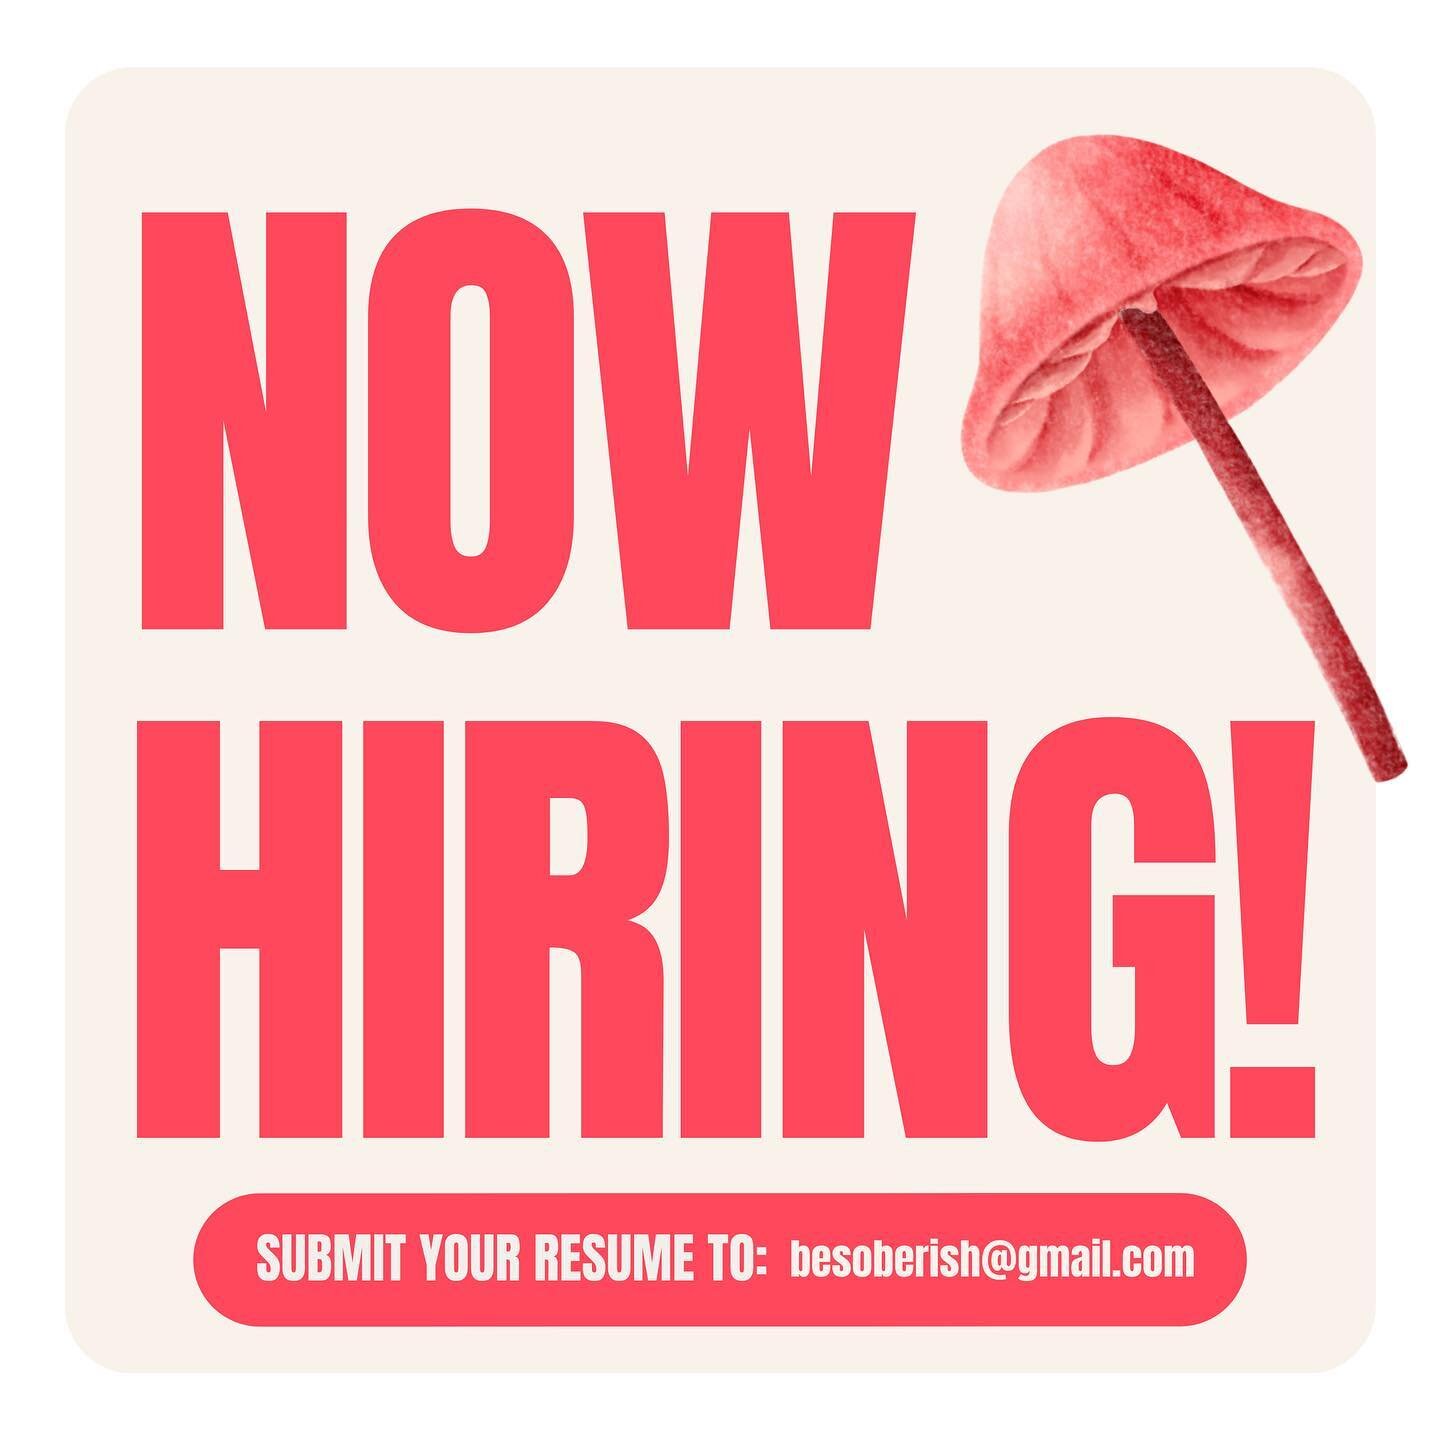 ✨We&rsquo;re Hiring!✨

We are looking for a new member to join our Soberish team! If you are interested in Non-Alcoholic products &amp; Cannabis and want to grow with our business, please send your resume to besoberish@gmail.com 🍾

Positions open: F